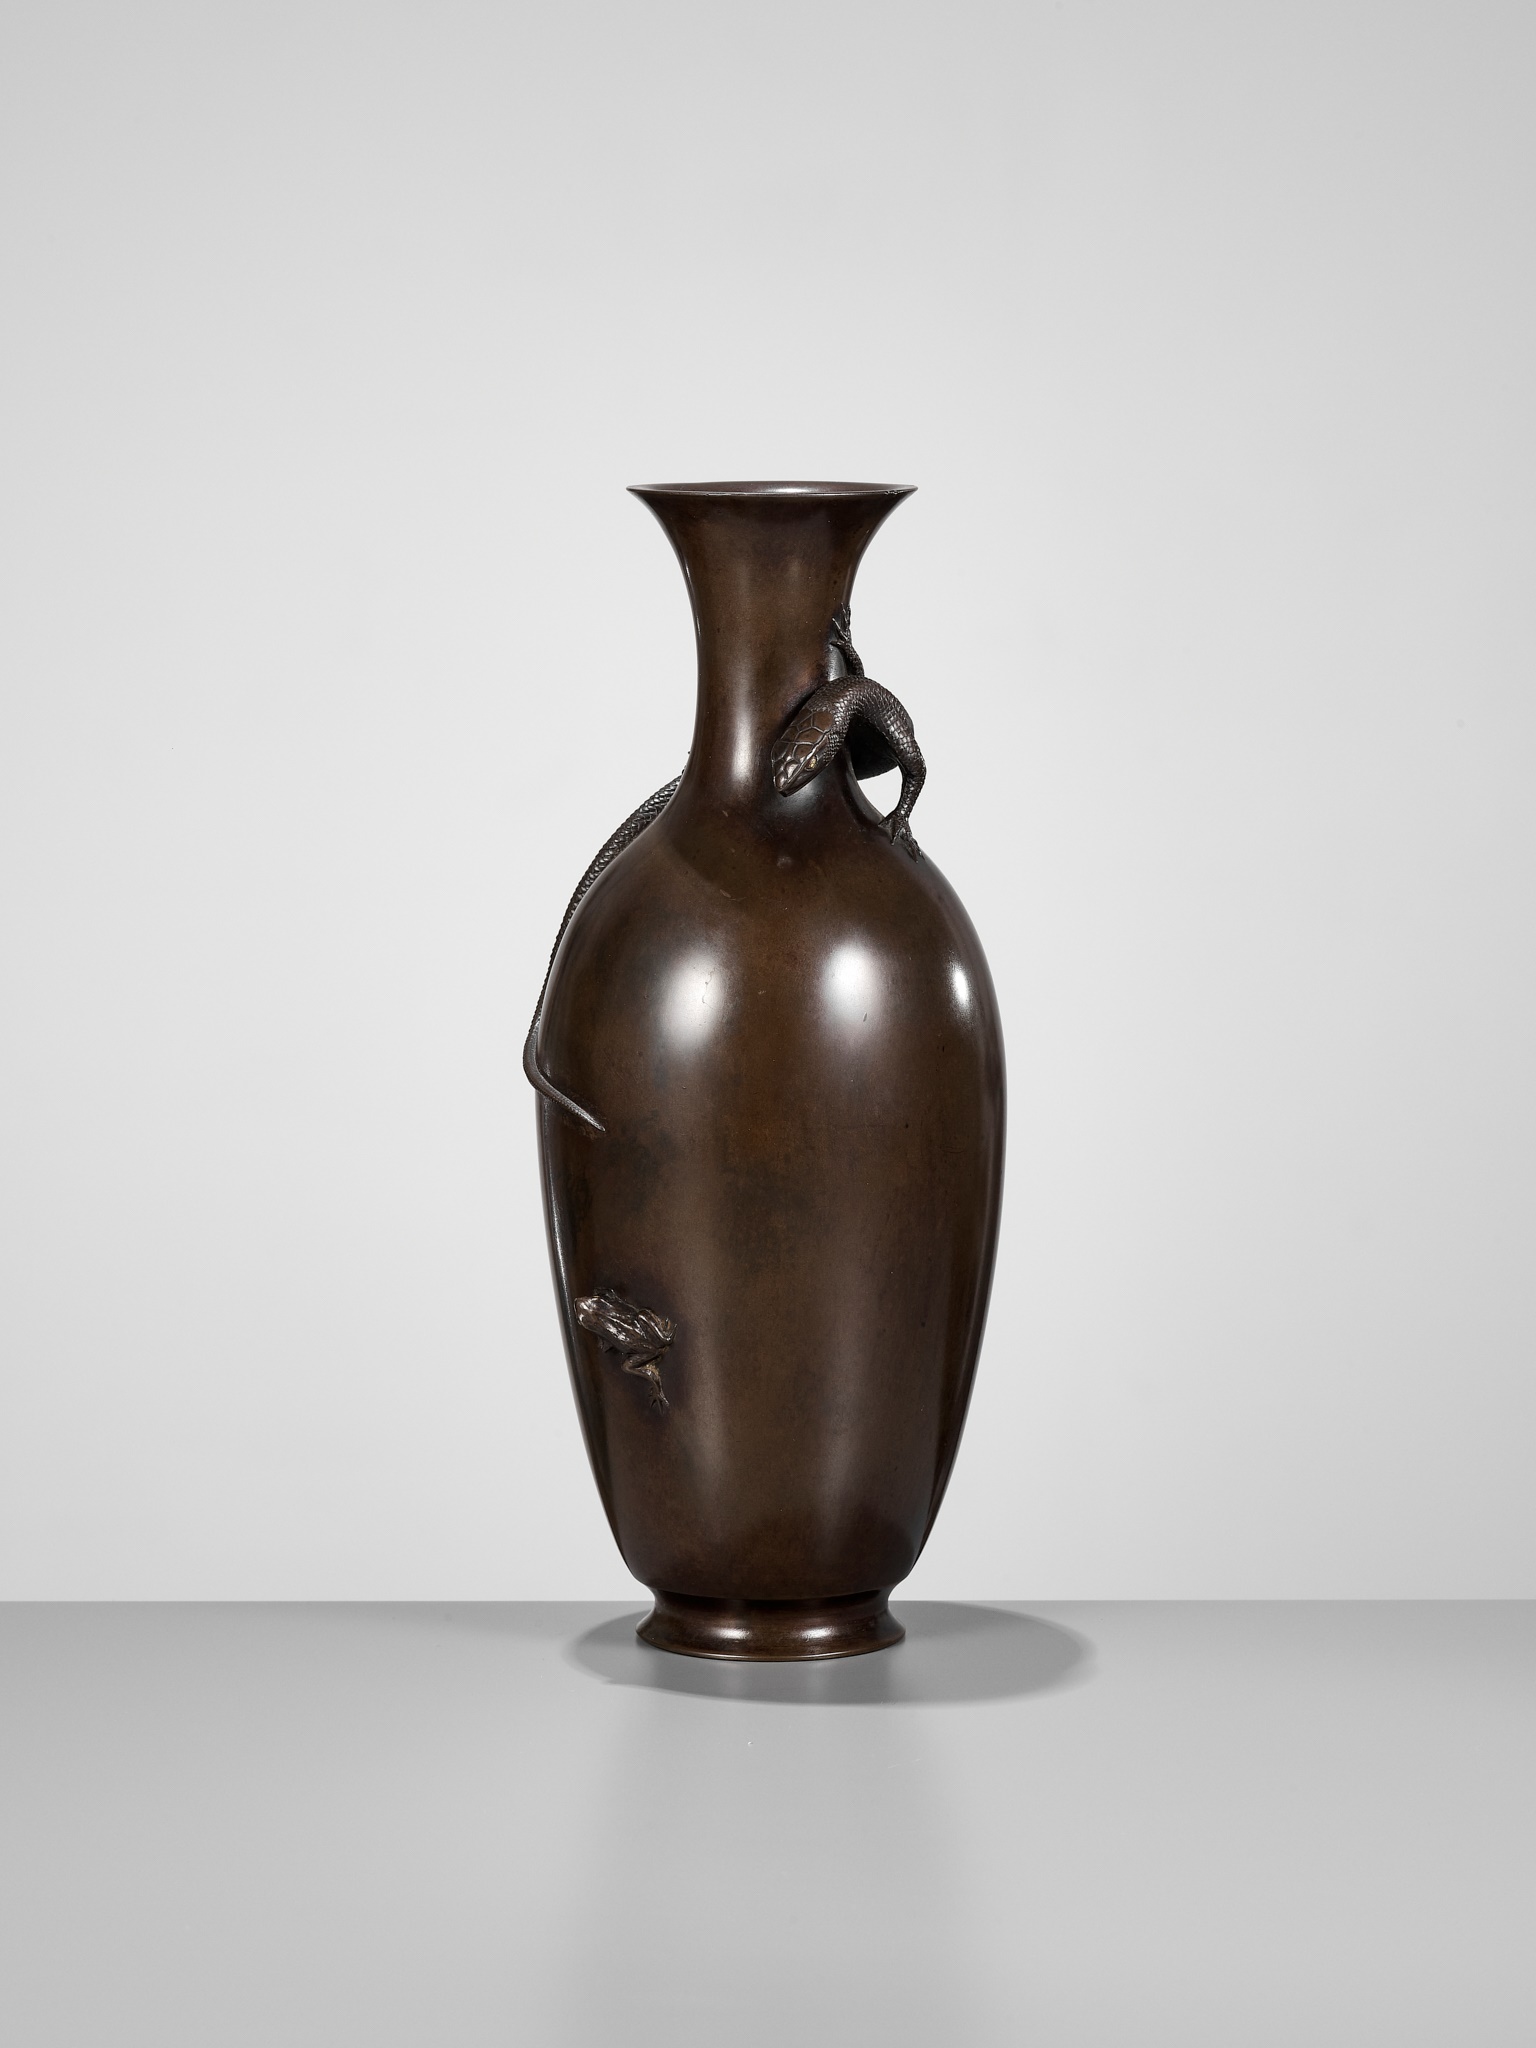 AKICHIKA: A FINE BRONZE VASE WITH LIZARD PREYING ON A FROG - Image 2 of 13